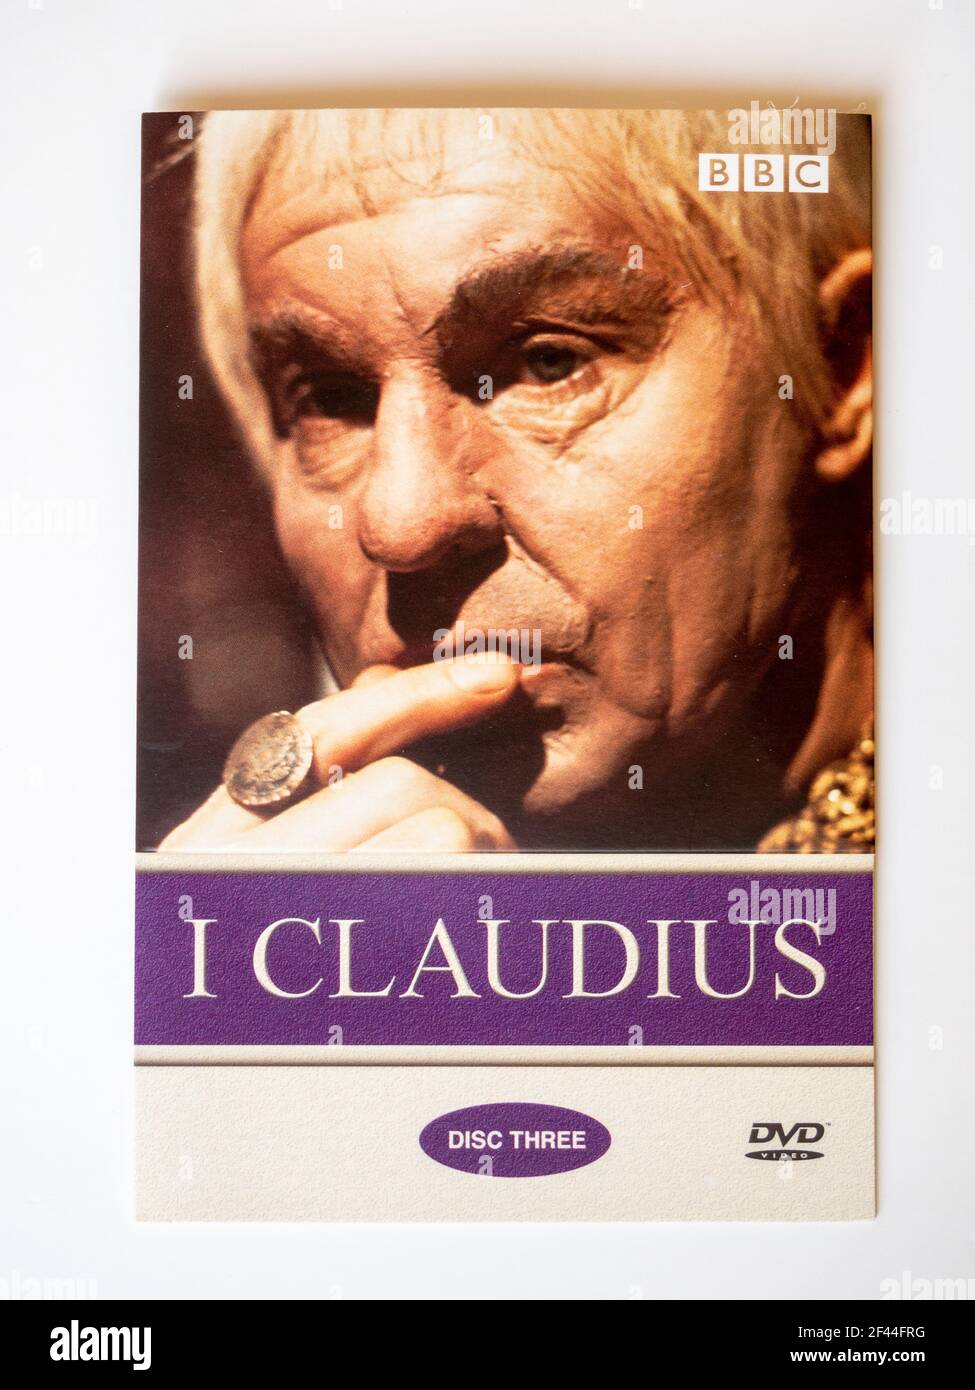 DVD of the 1976 BBC TV series I Claudius, based on the novels by Robert Graves; actor Derek Jacobi pictured Stock Photo